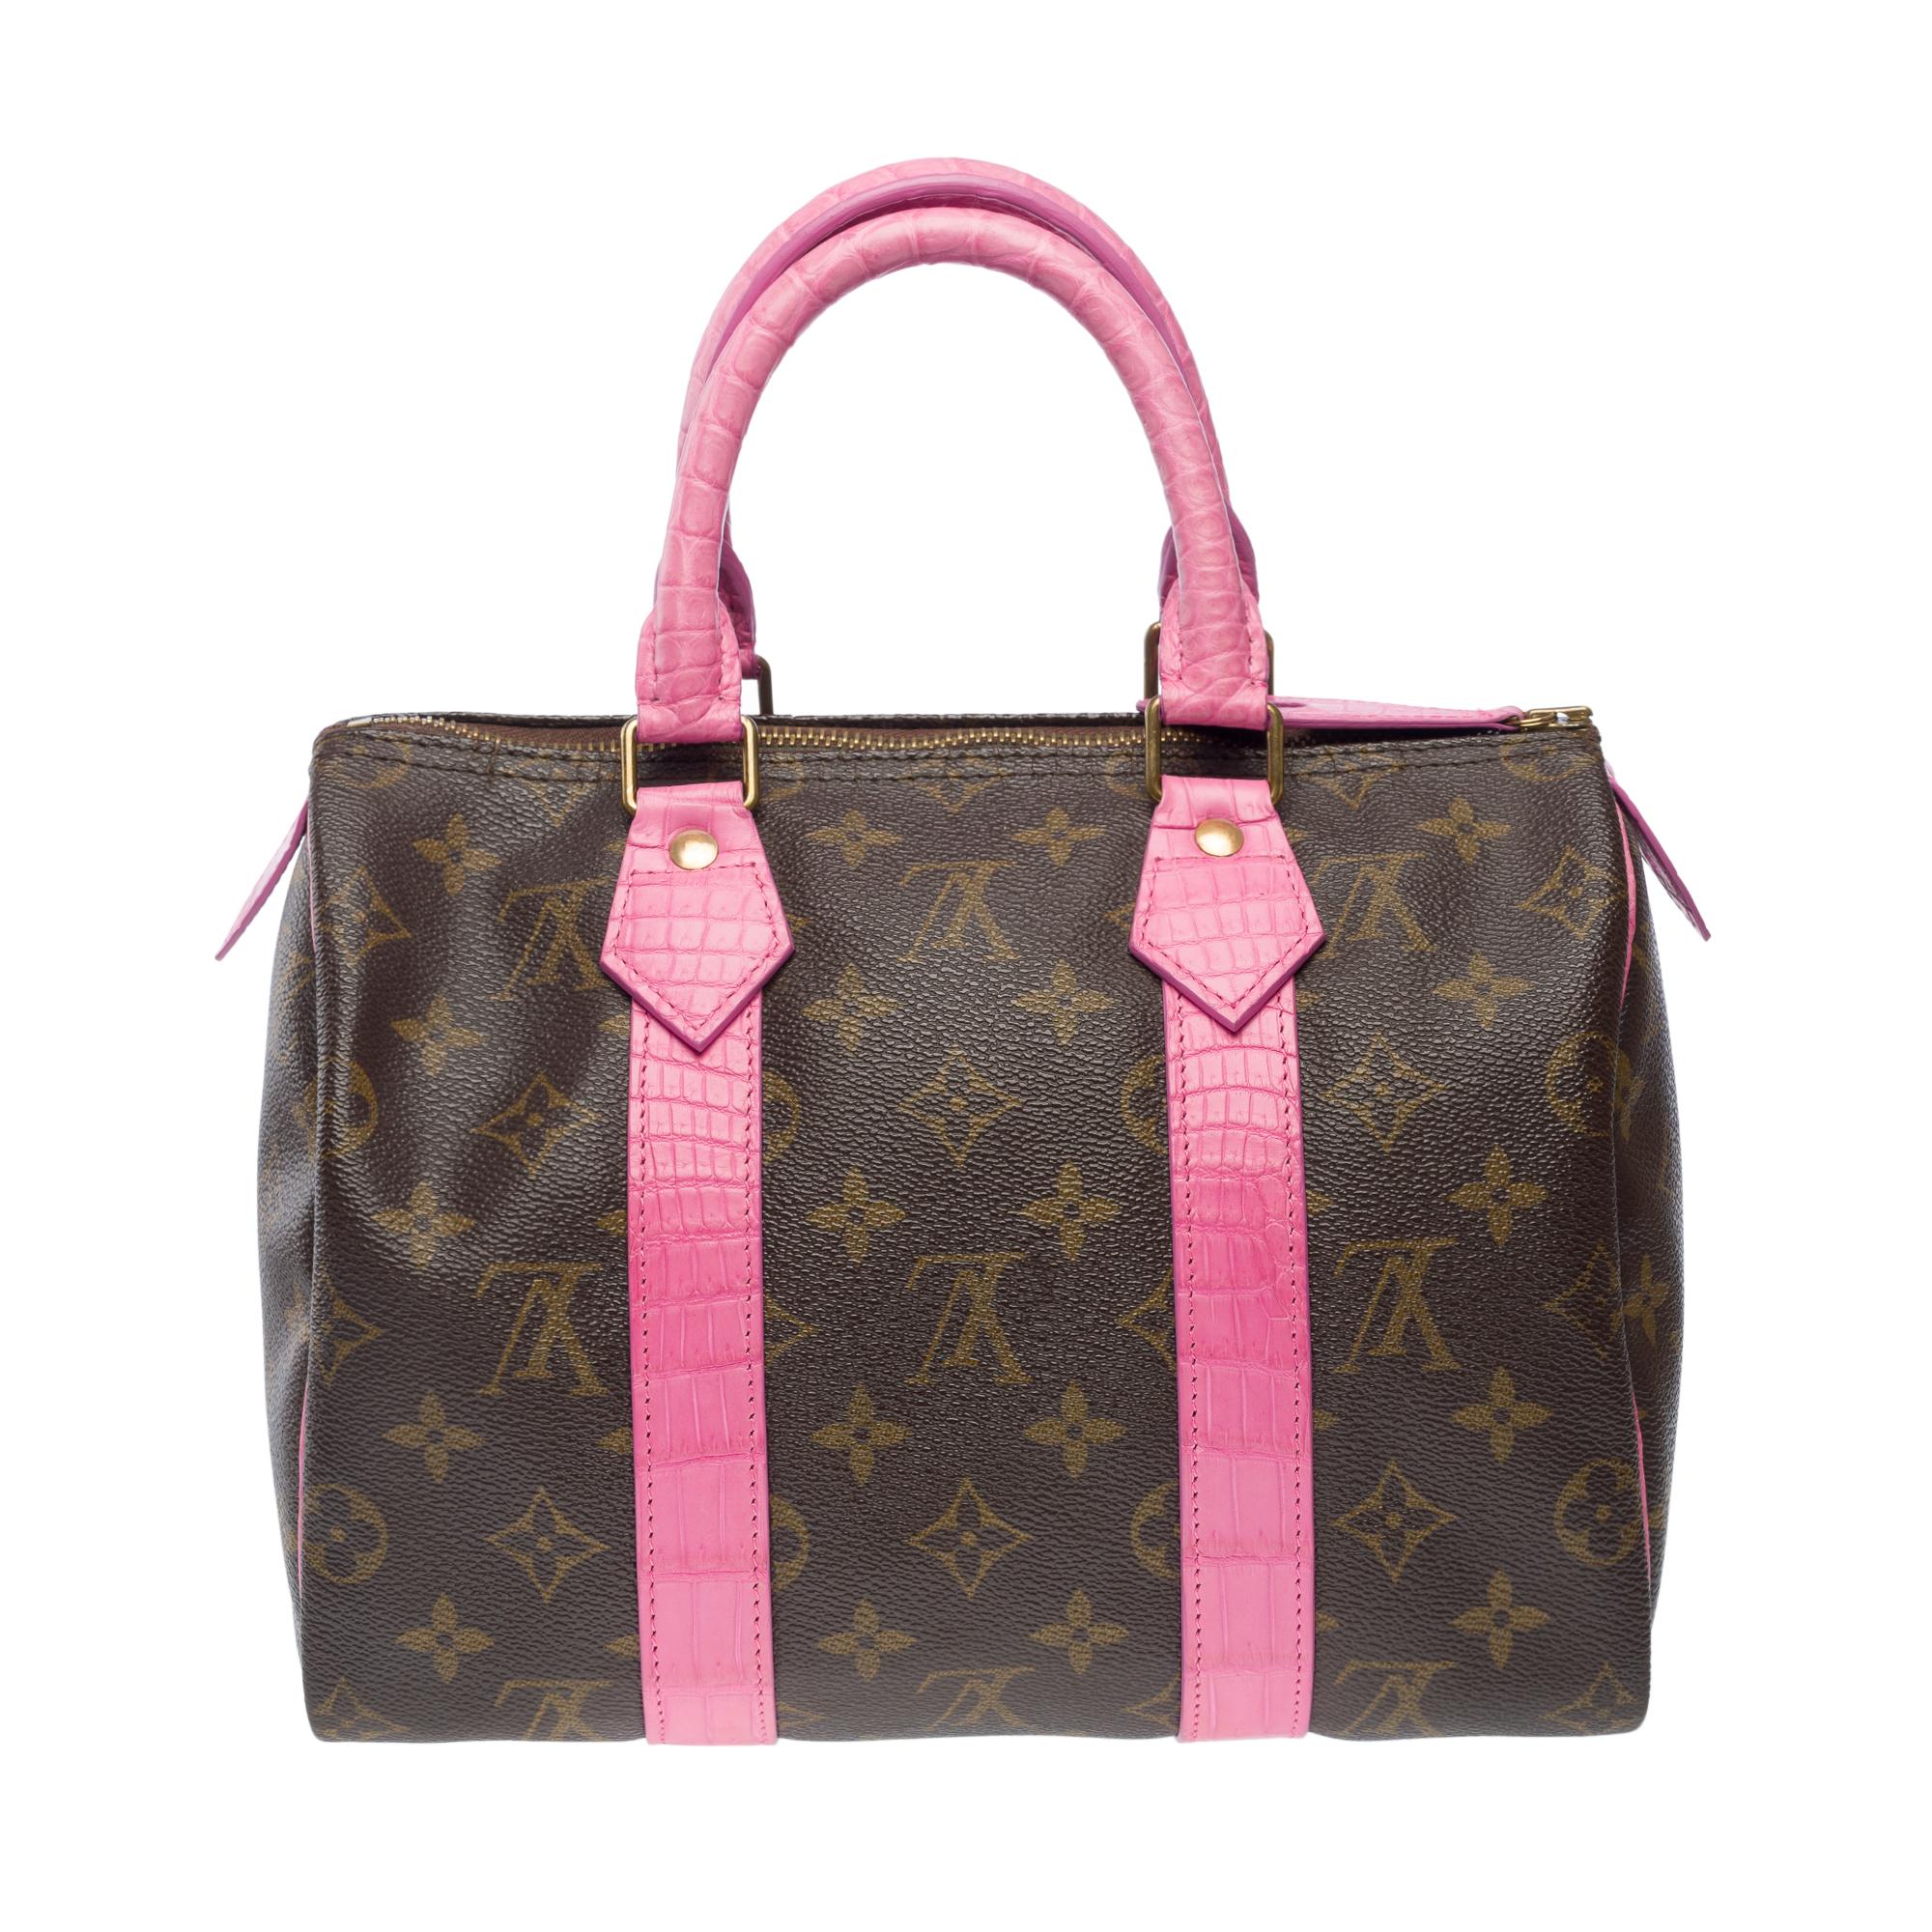 Women's or Men's Customized Louis Vuitton Speedy 25 handbag Flowers with Pink Crocodile leather For Sale